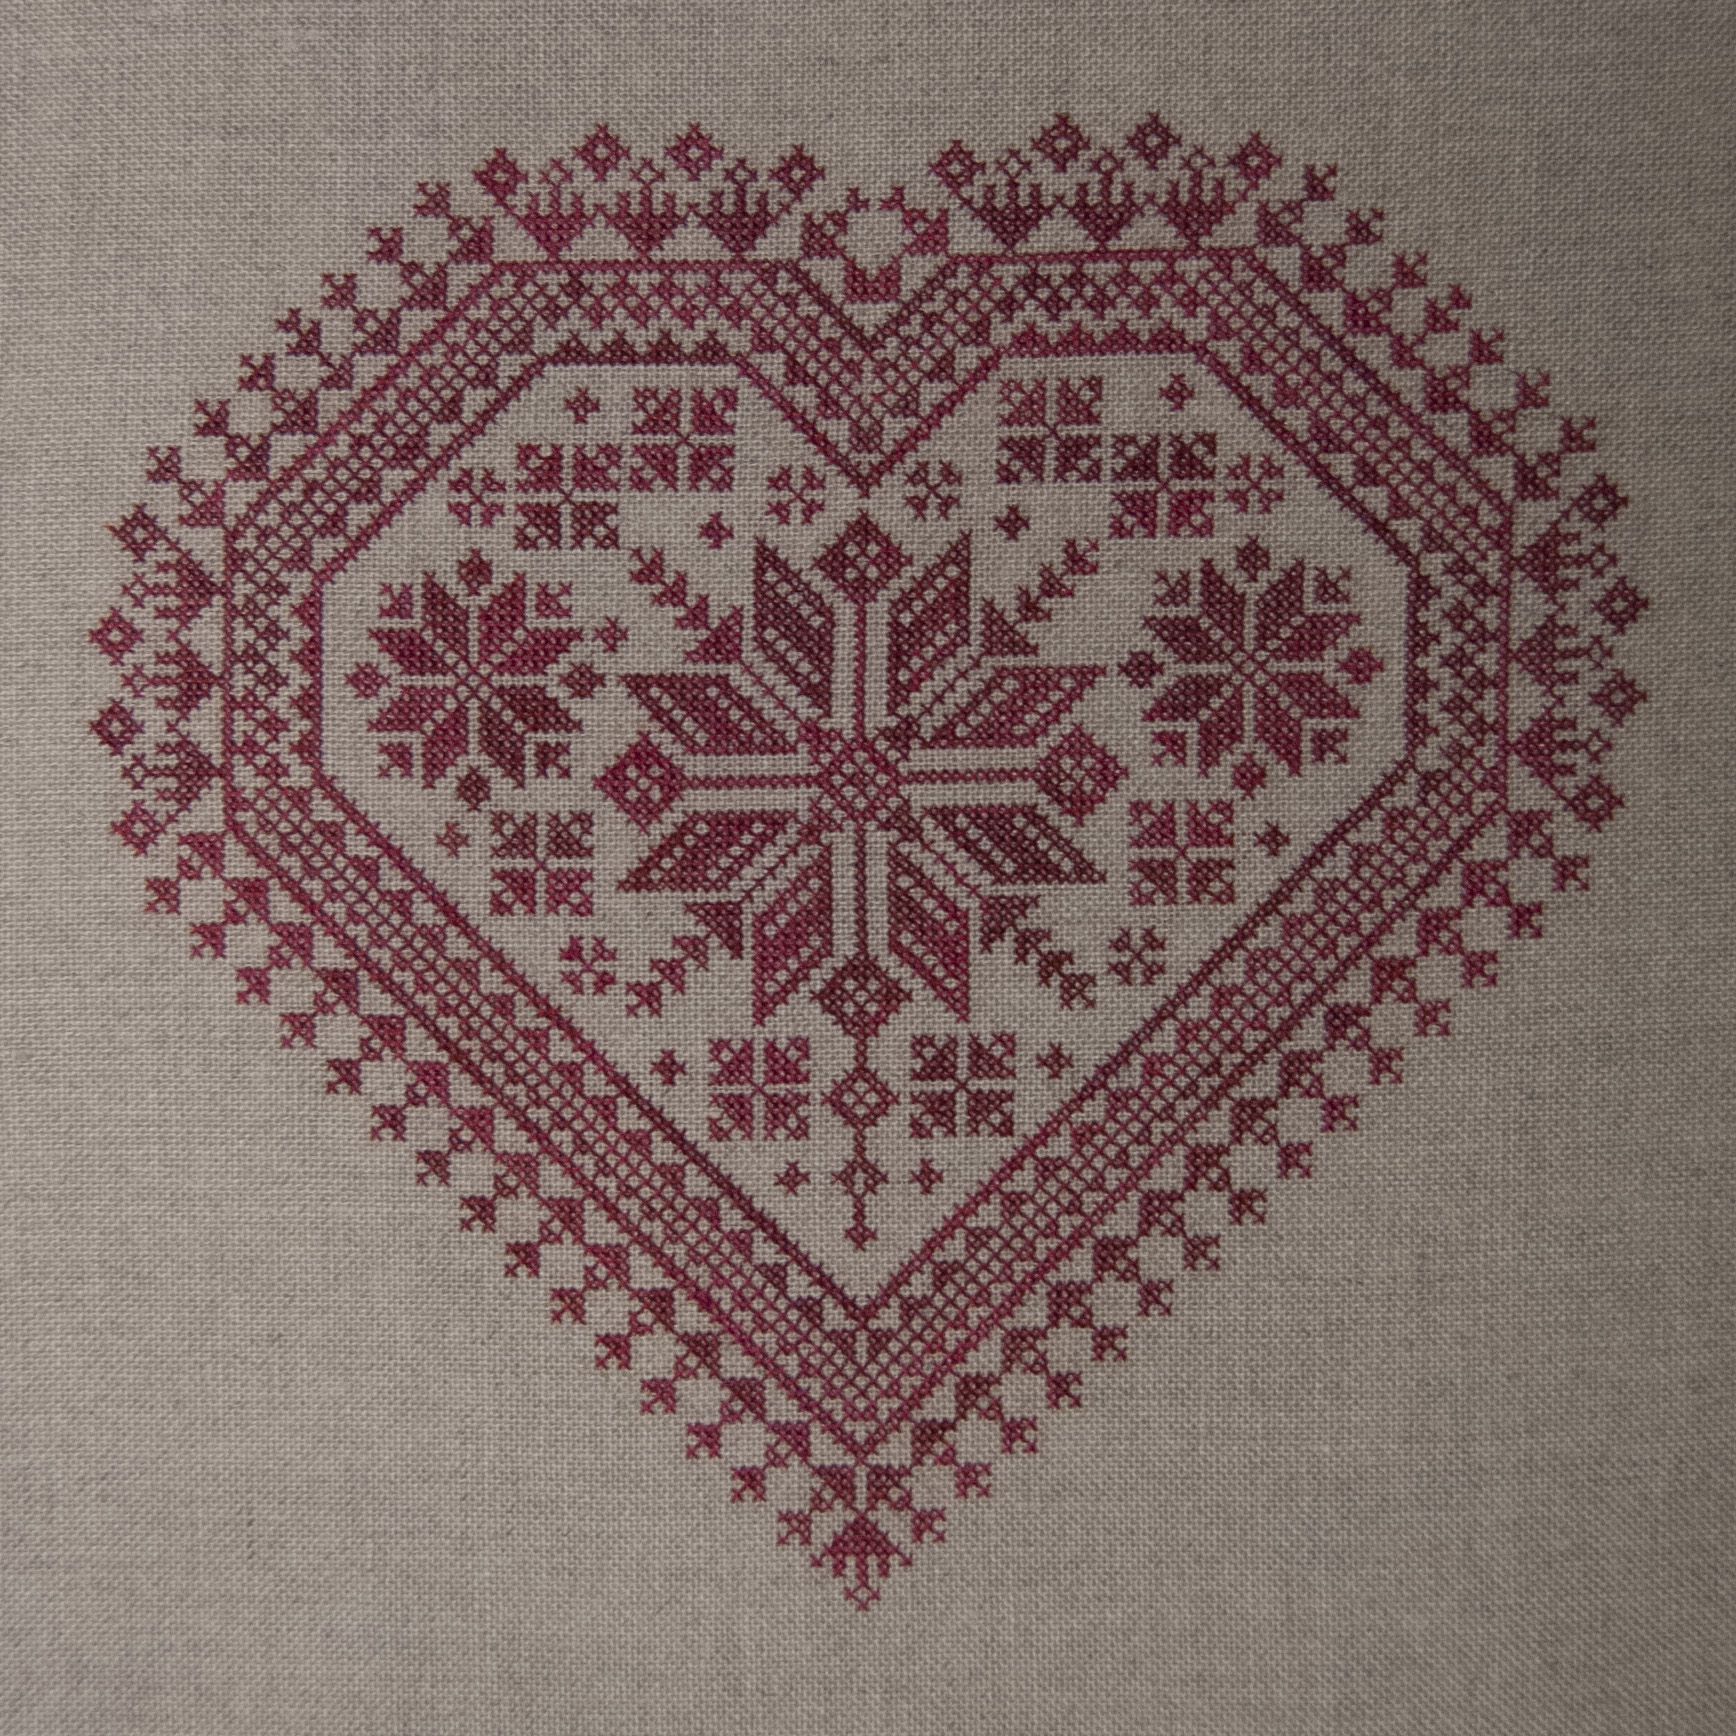 Norwegian Embroidery Patterns The Nordic Heart Modern Folk Embroidery